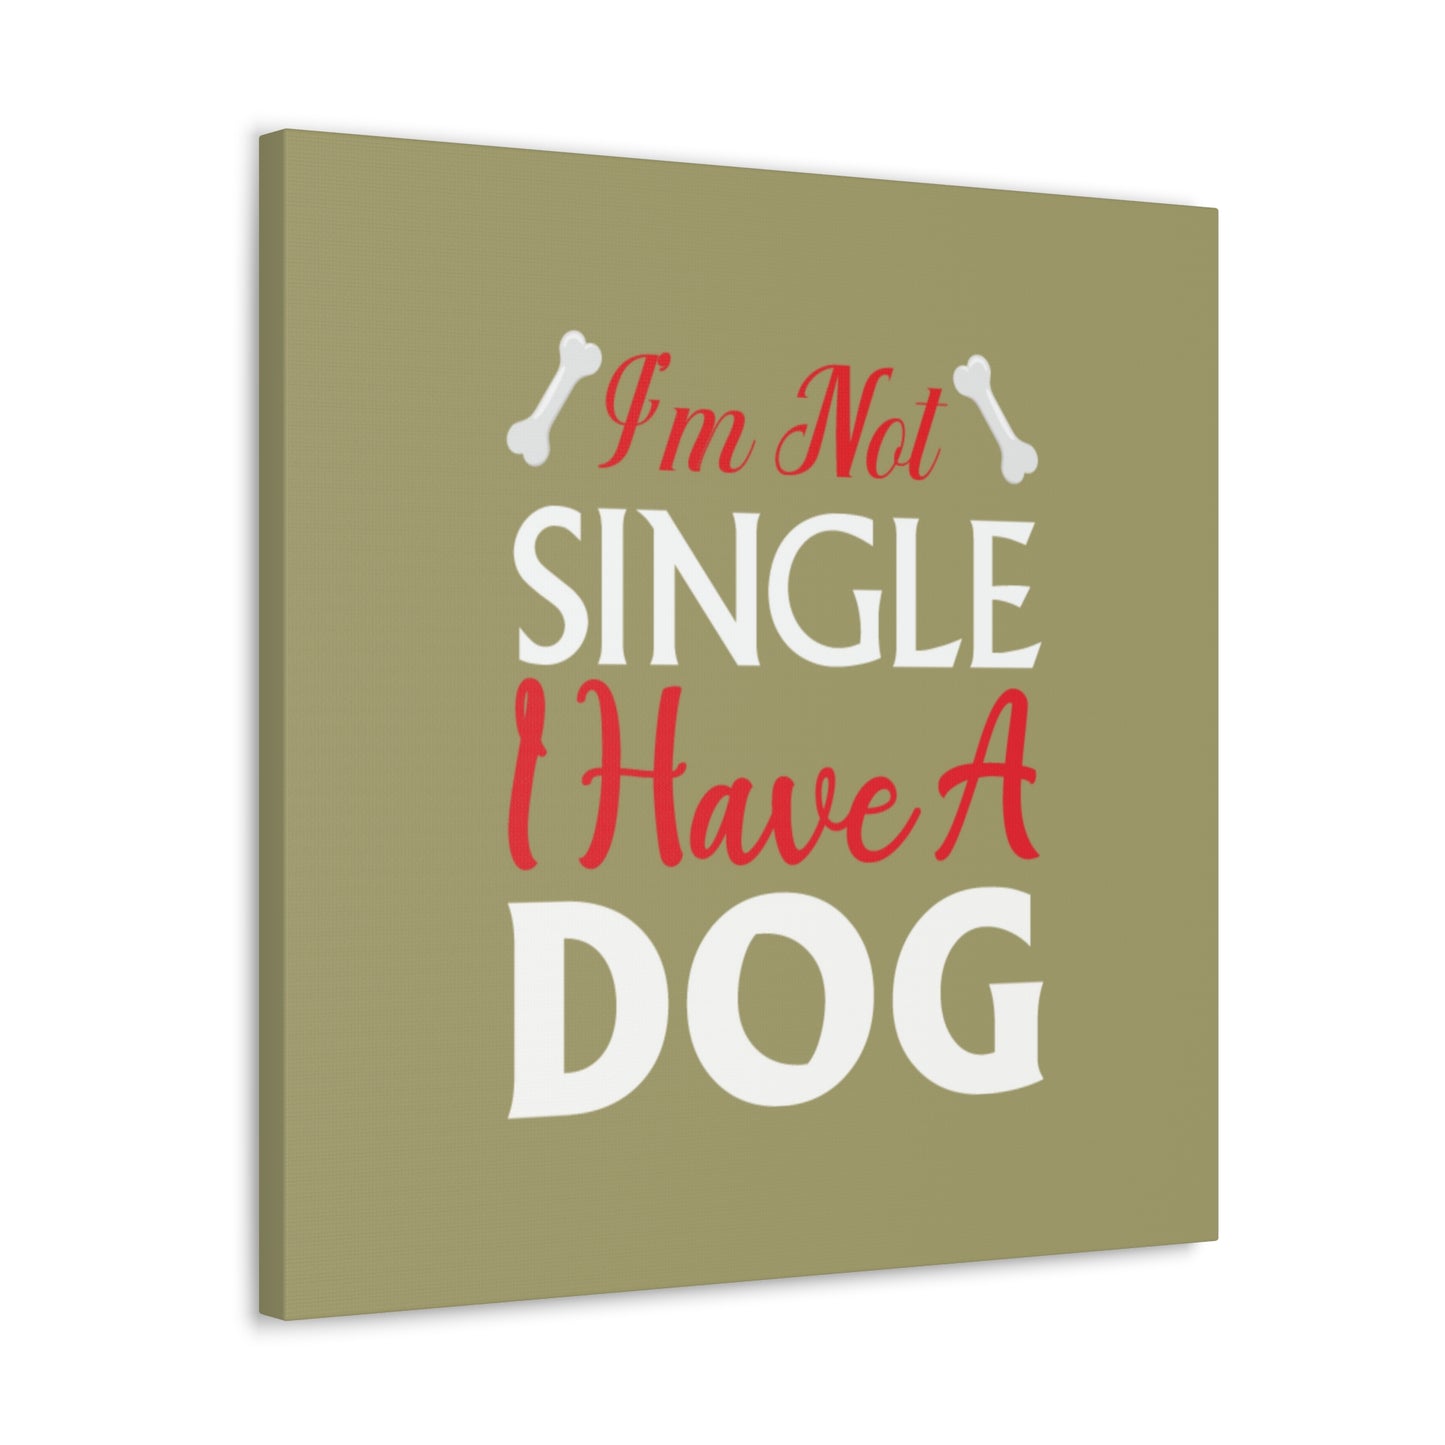 "I'm Not Single, I Have A Dog" Wall Art - Weave Got Gifts - Unique Gifts You Won’t Find Anywhere Else!